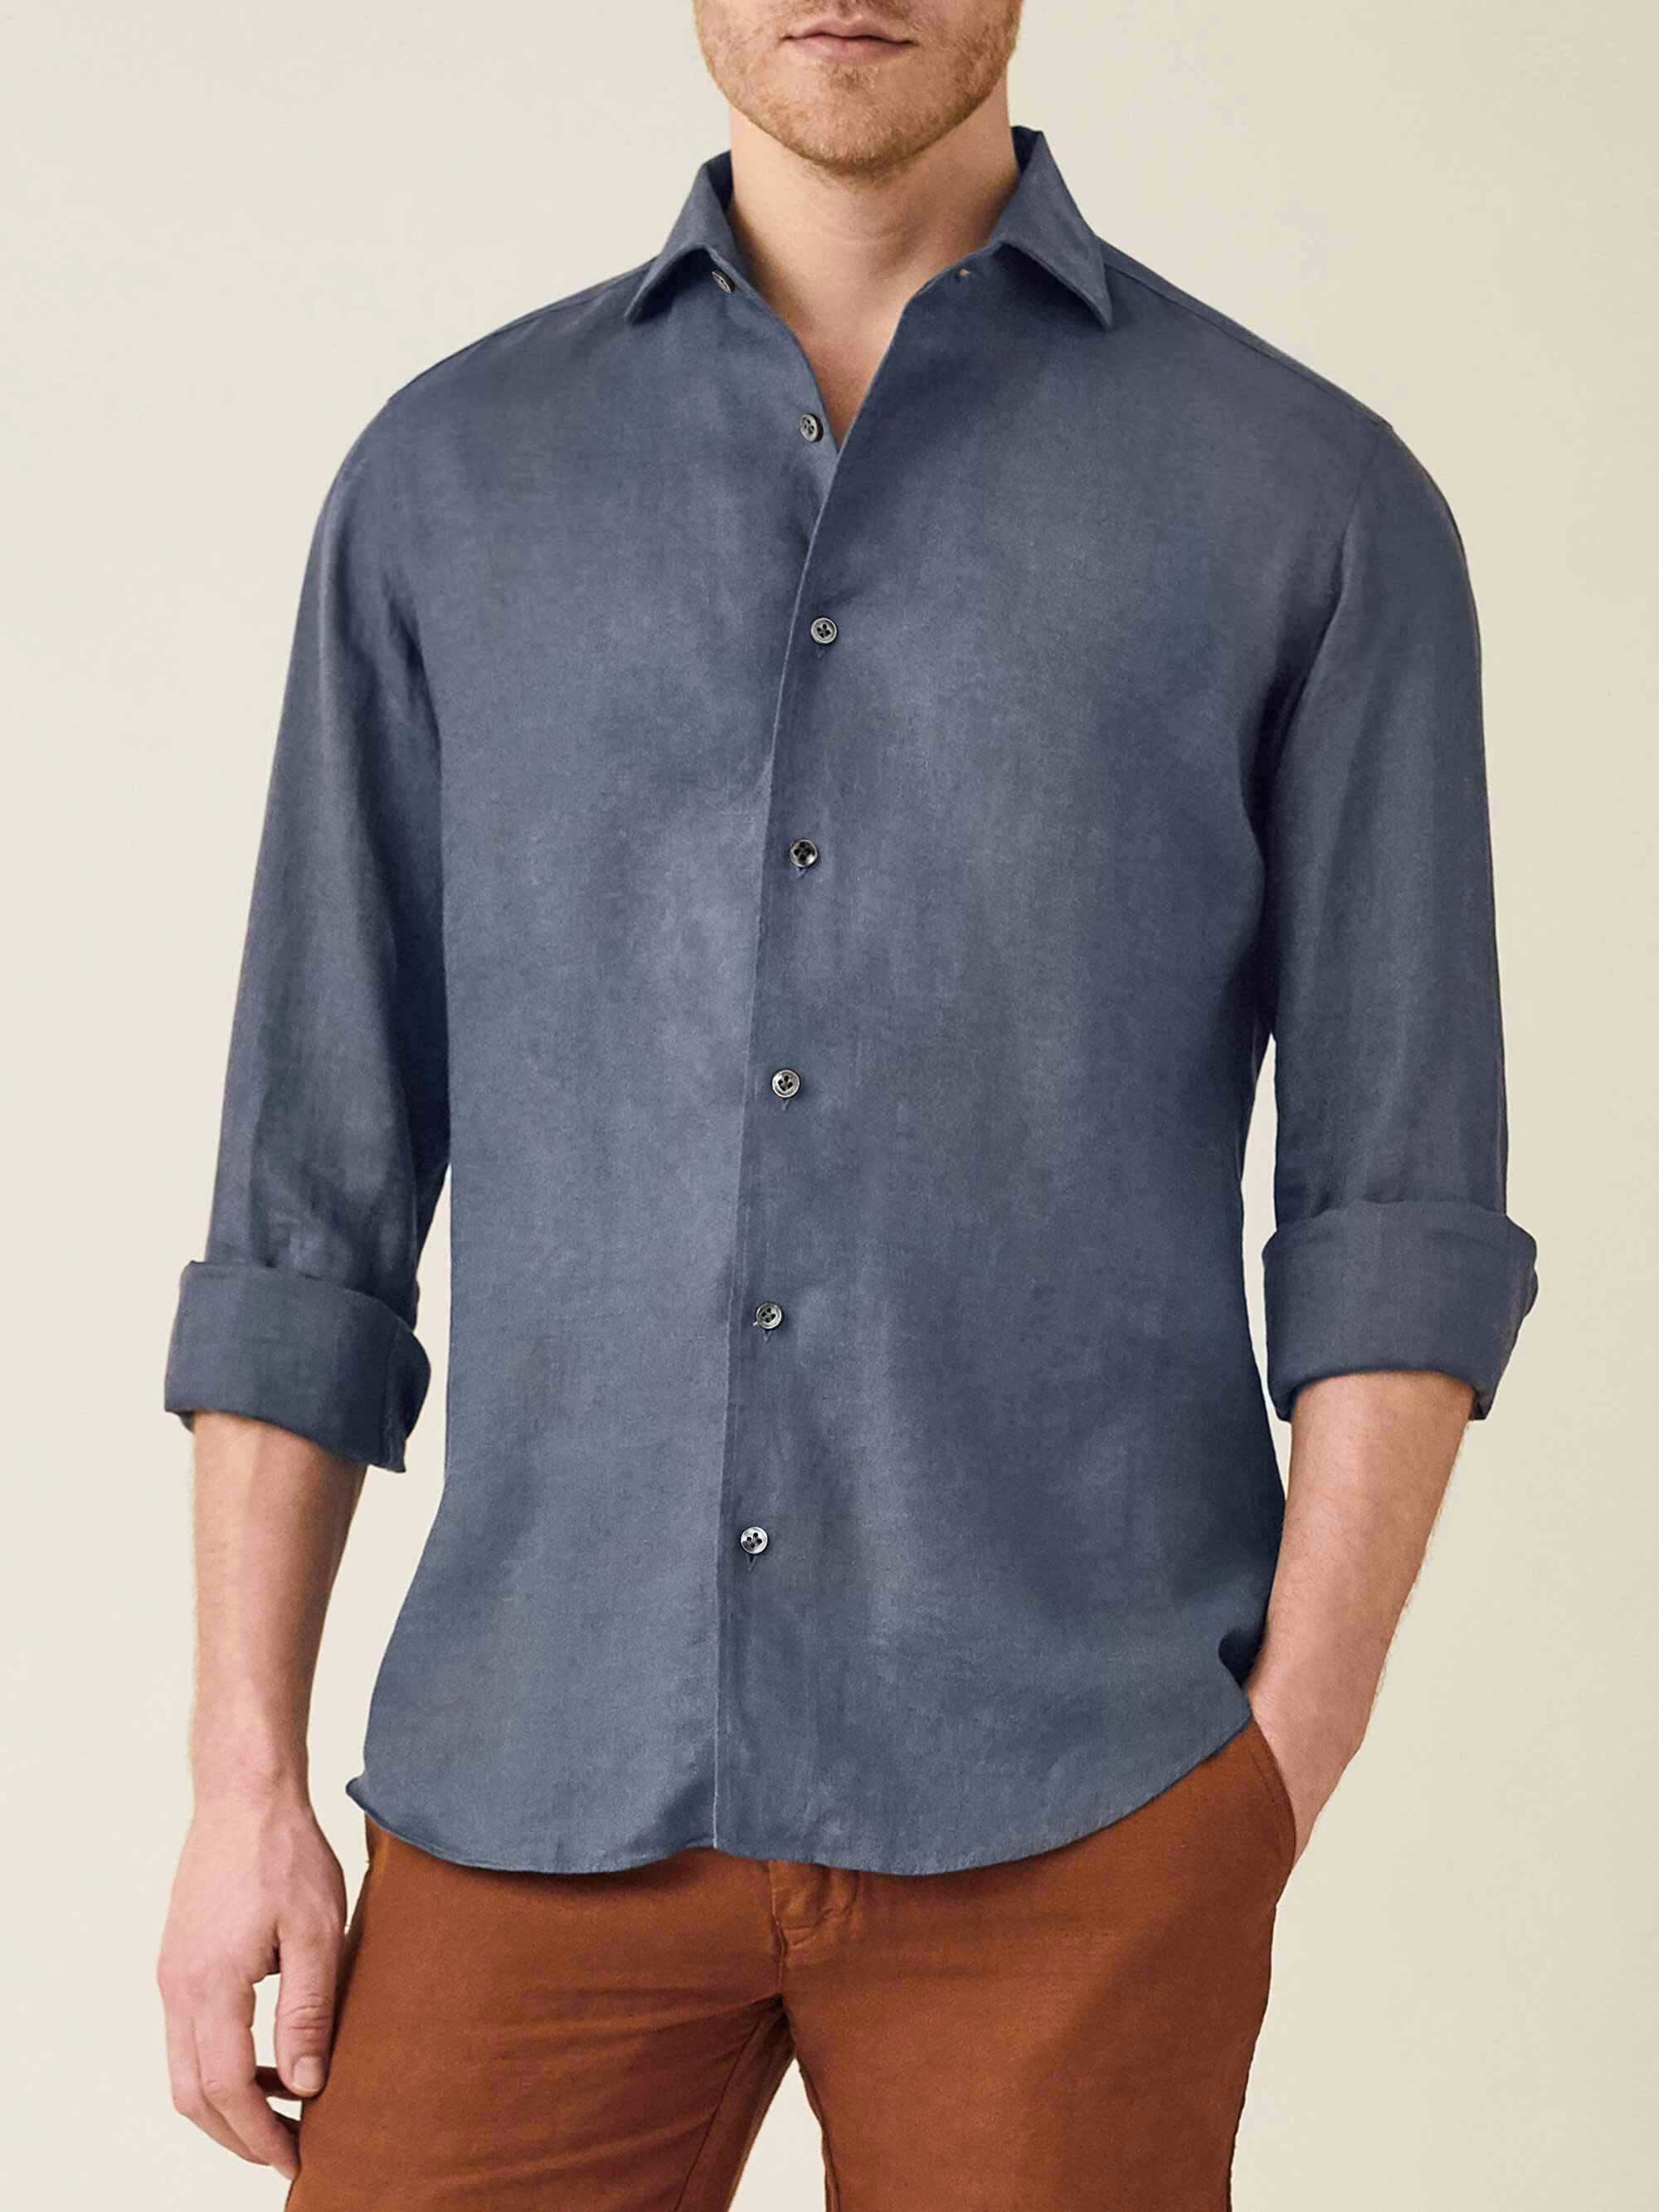 Luca Faloni's Men Payne's Grey Linen Shirt - One-Piece Classic Cutaway Collar - Made in Italy product